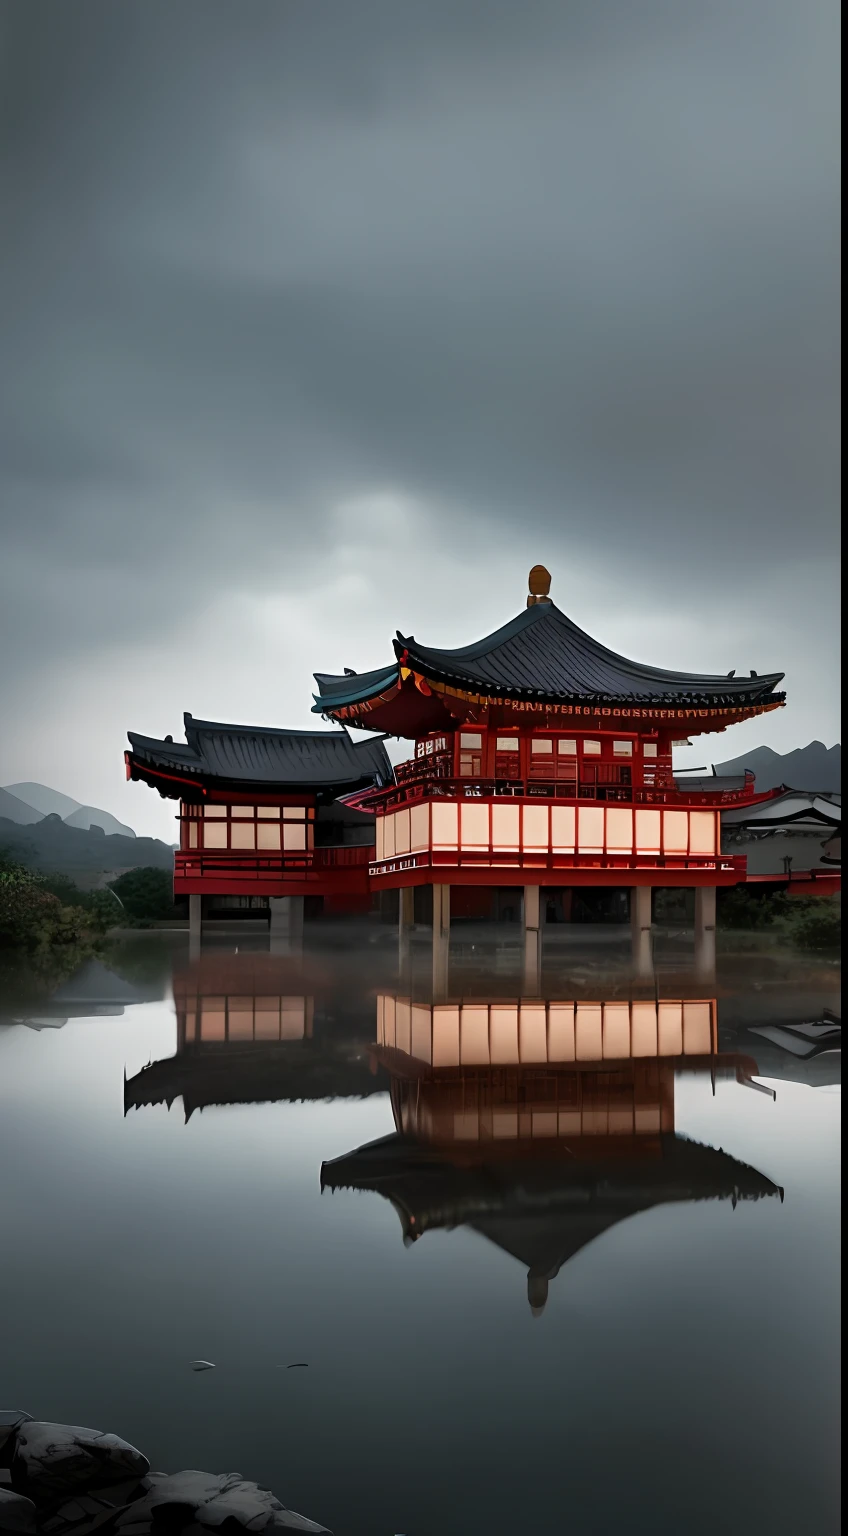 Arafed pagoda with a reflection in a lake under a cloudy sky - SeaArt AI